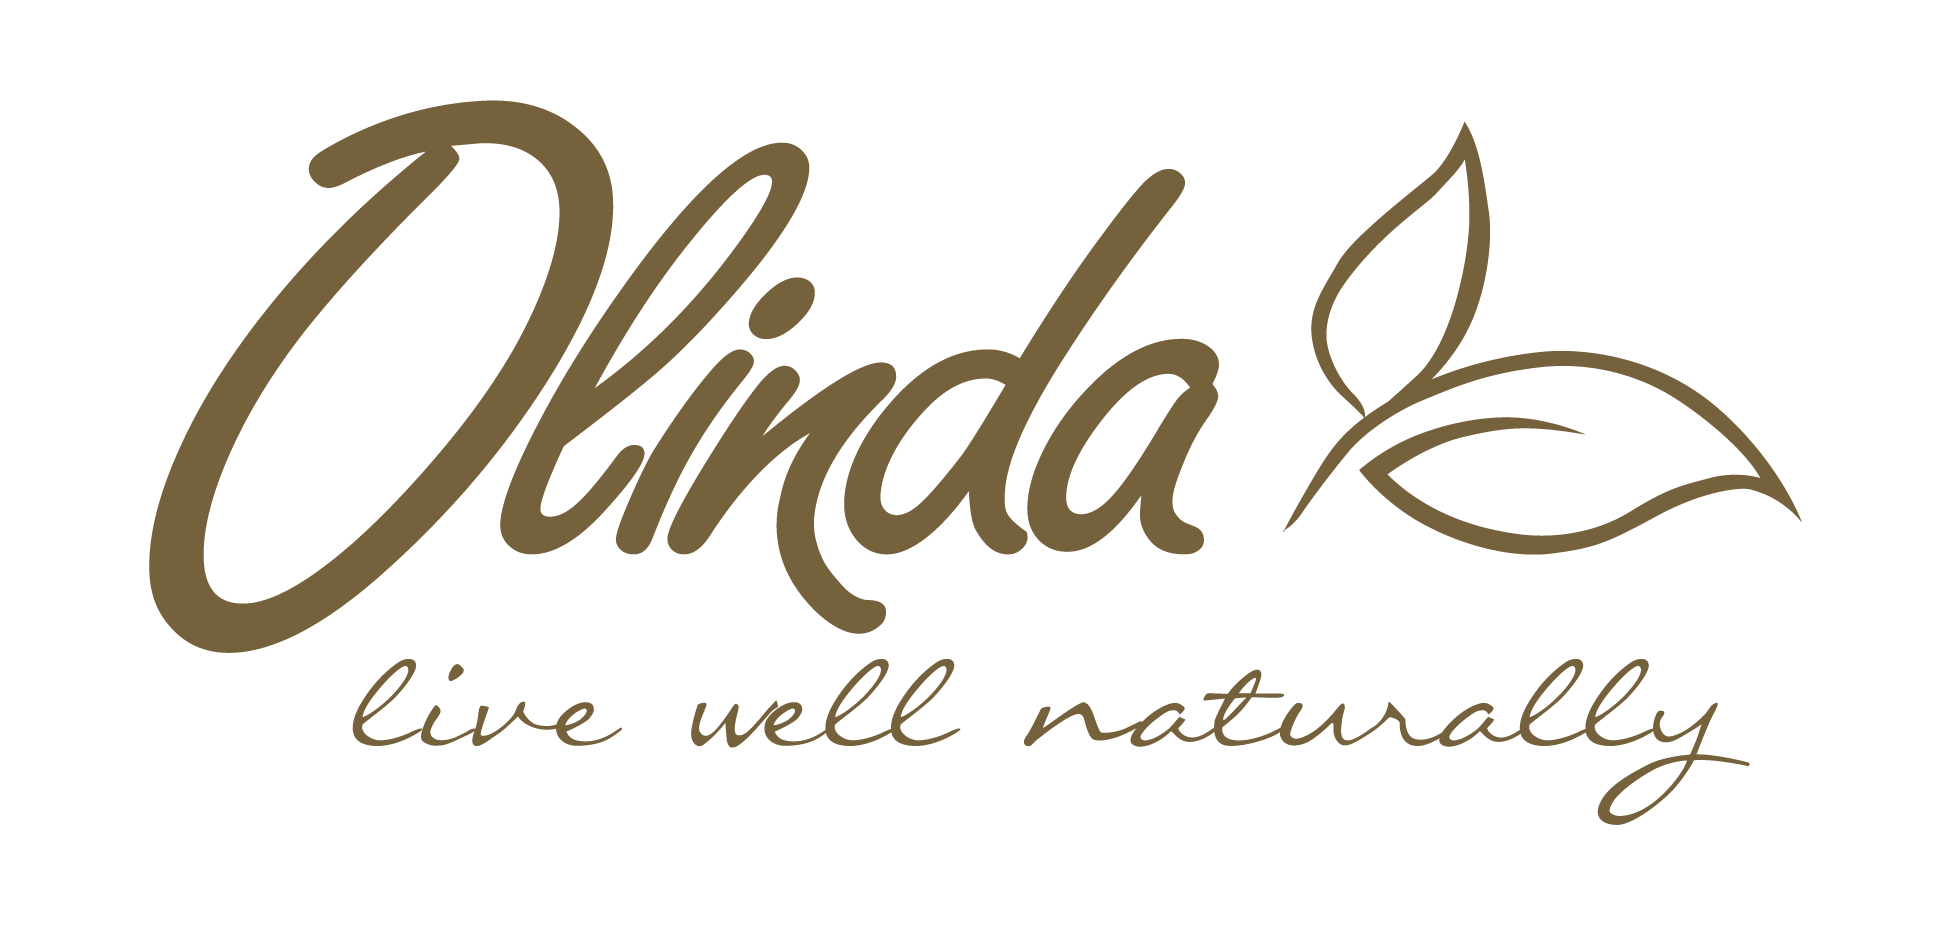 Olinda Teas is a Ceylon Tea brand with over 5 decades of commitment towards ethics and excellence | www.olindateana.com